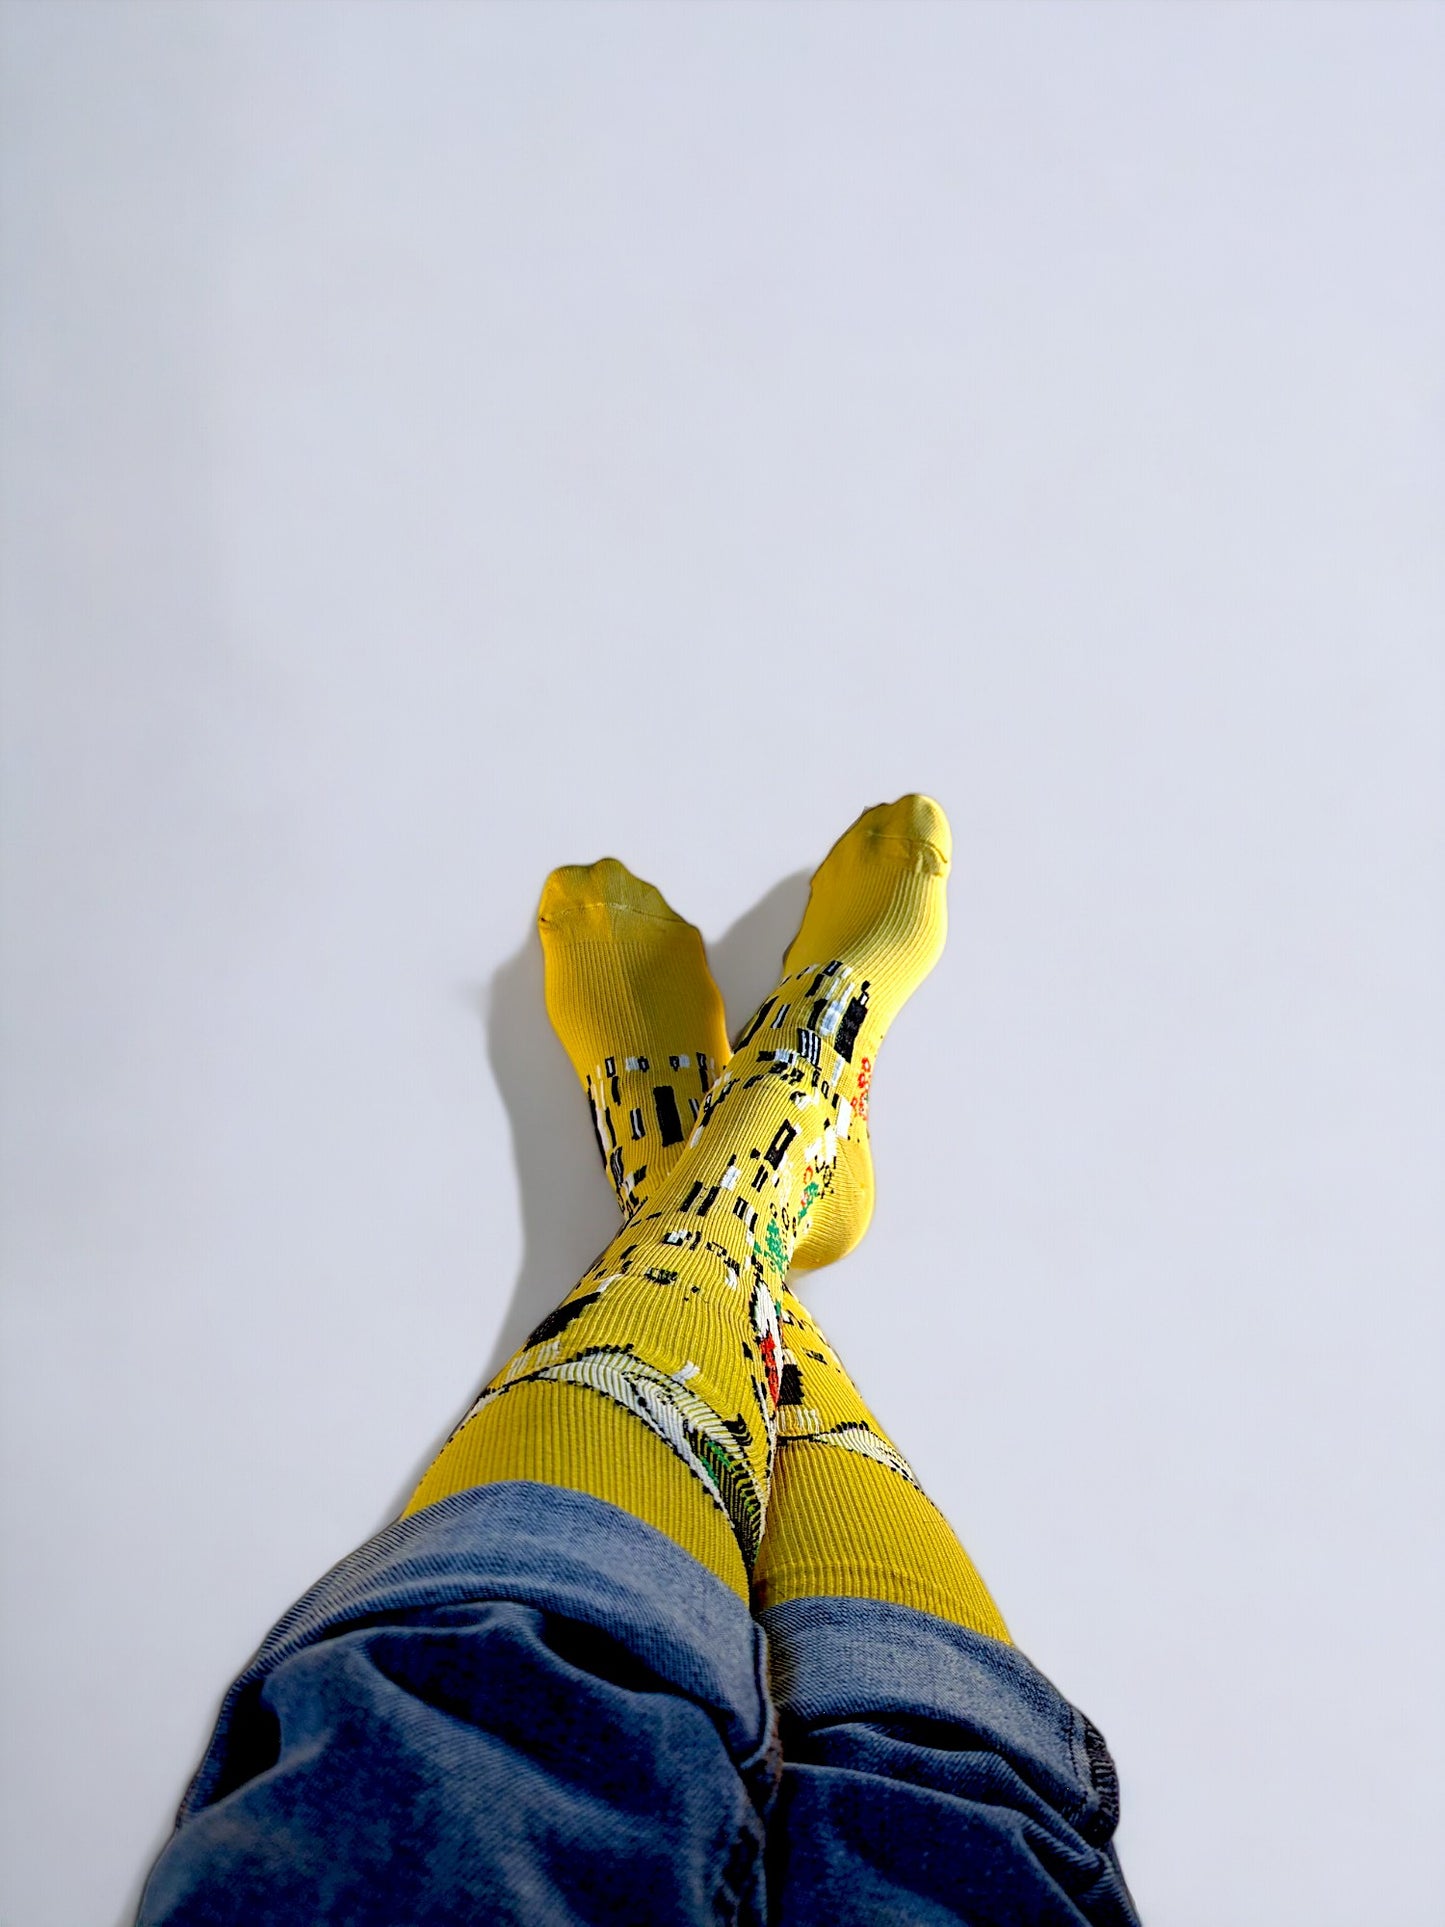 A pair of crossed legs wearing yellow compression socks with the famous painting 'Kiss' printed on it.